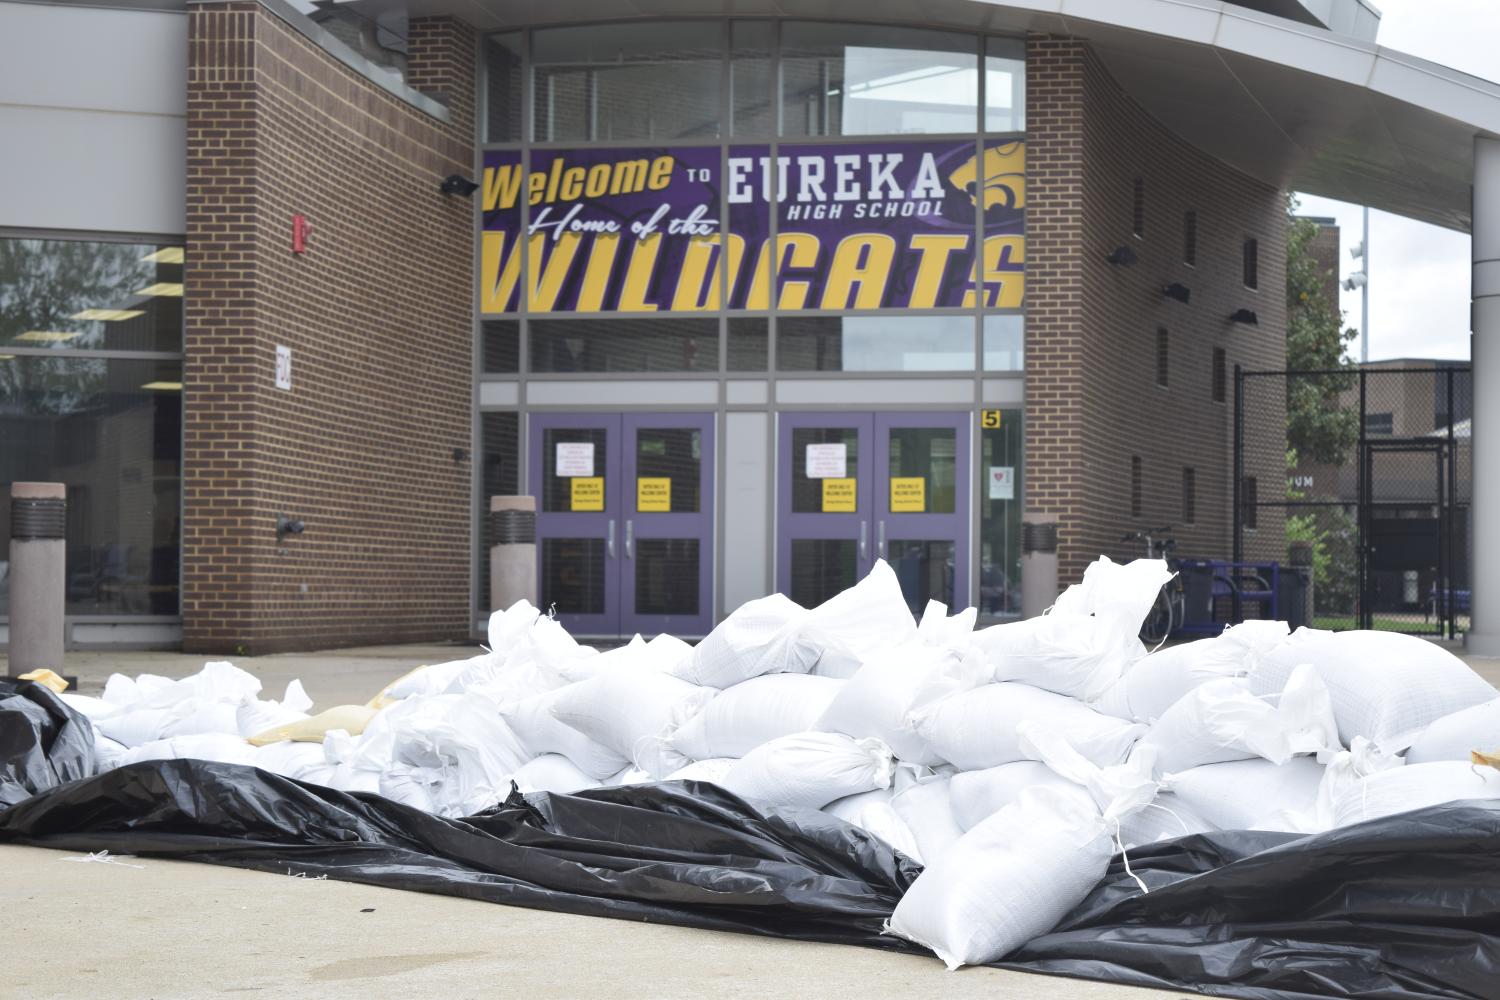 Volunteers+prepare+for+the+potential+flooding+of+the+school+by+stacking+sandbags%2C+April+30.